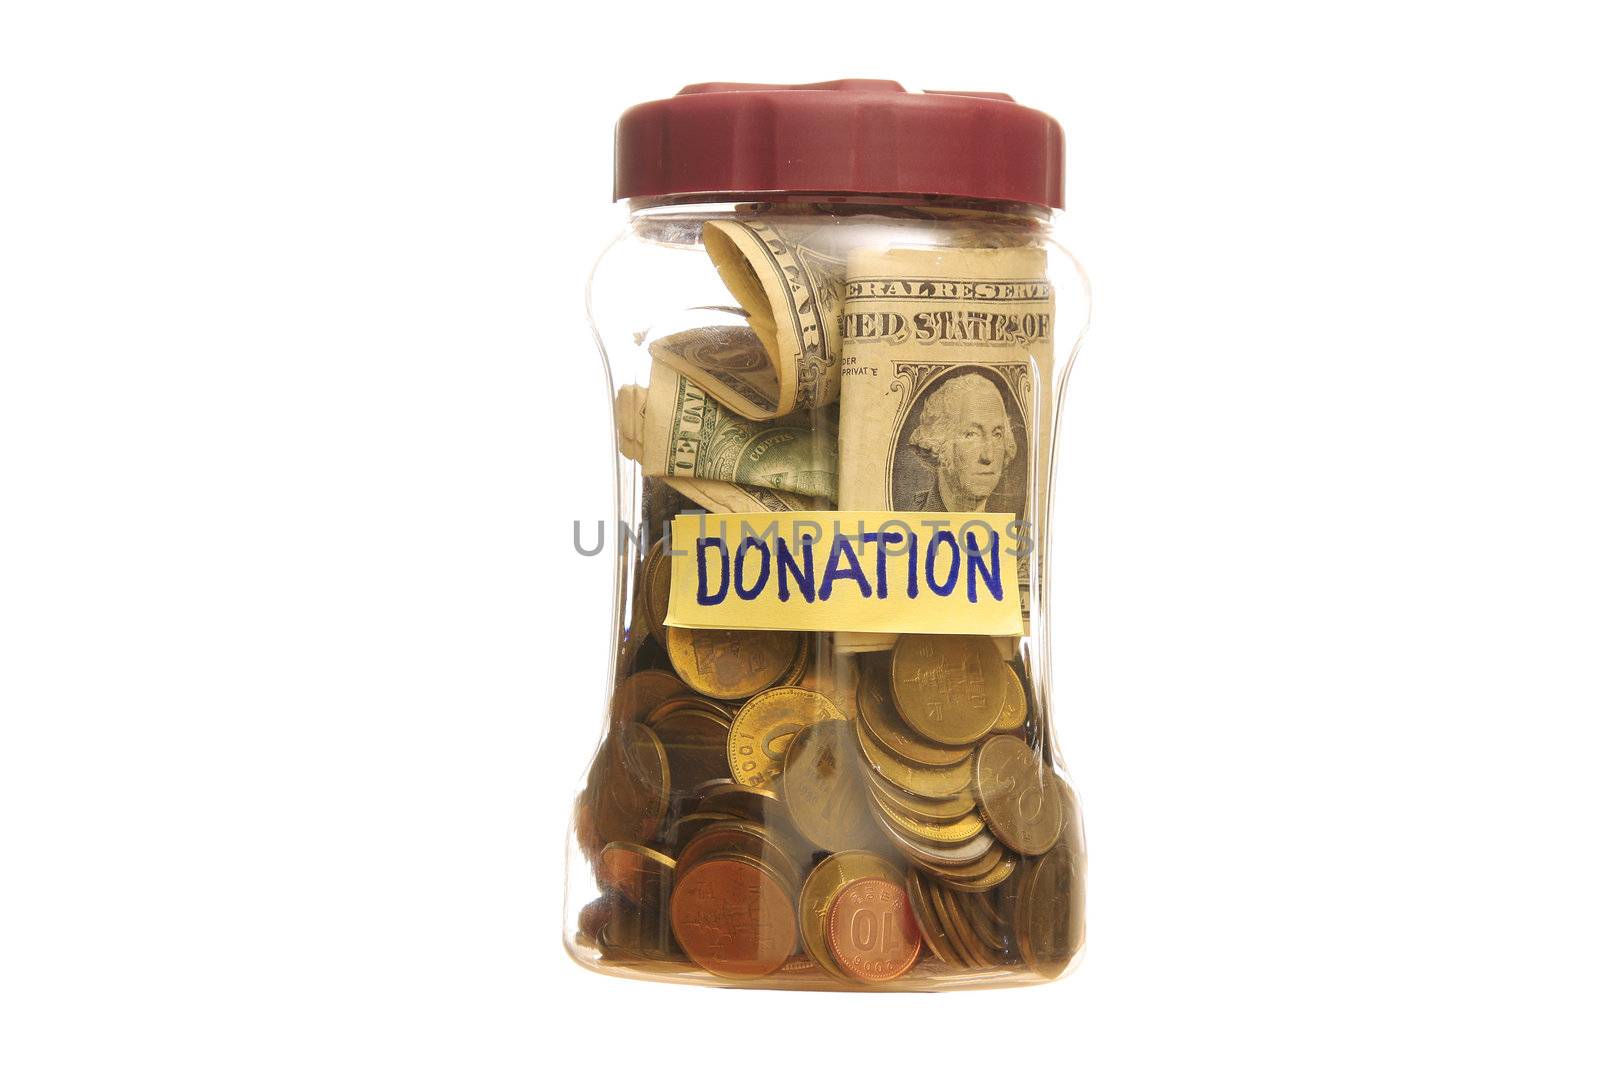 Donation in a Jar by sacatani